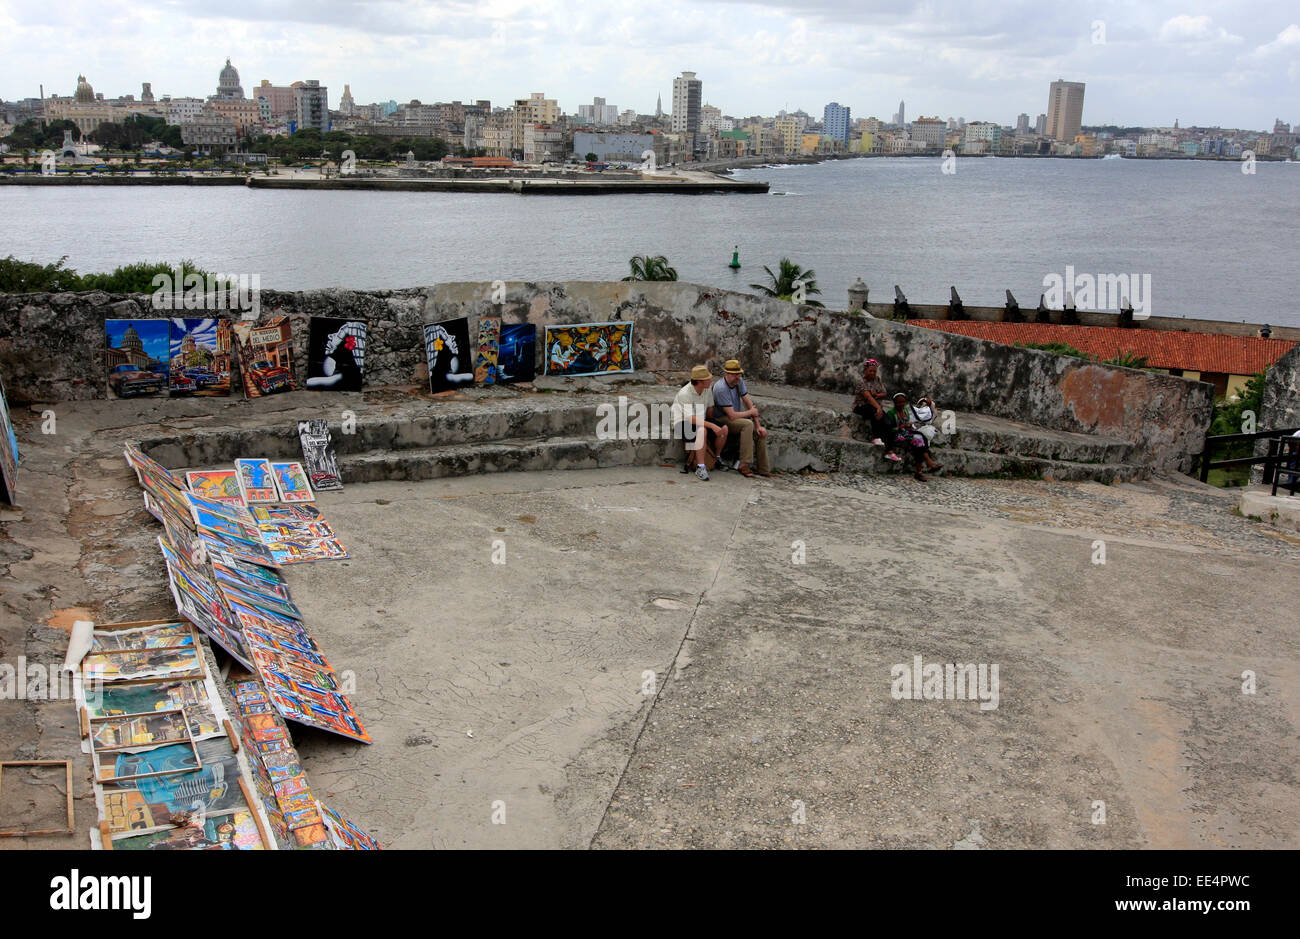 Selling pictures inside the old walls of the Morro Castle in Havana, Cuba with the Havana skyline in the background Stock Photo